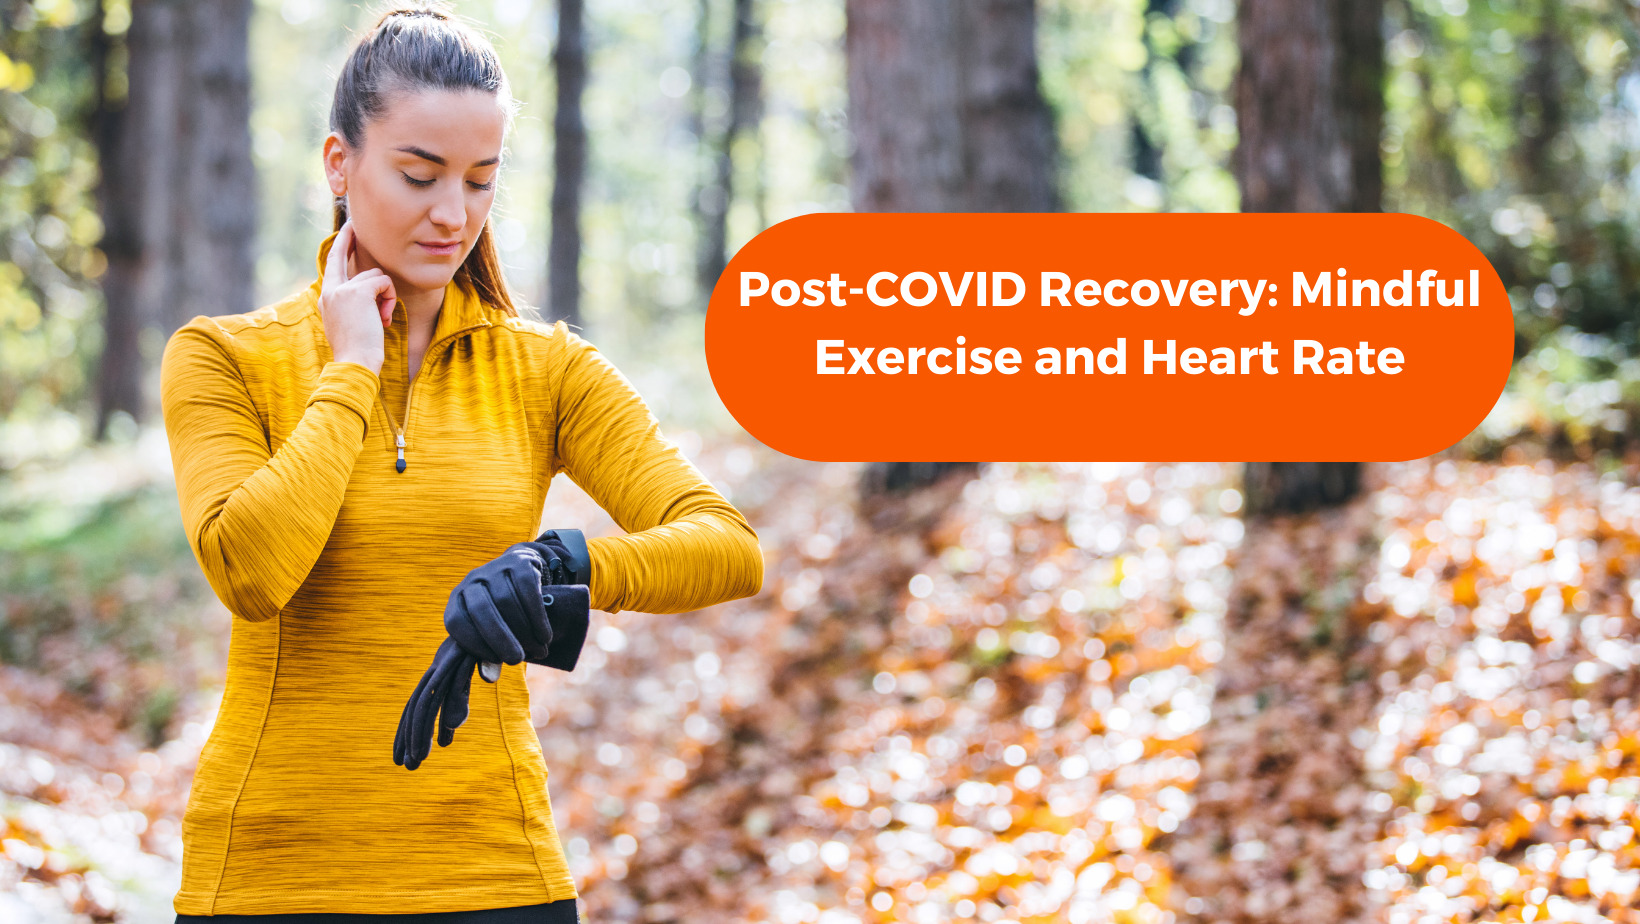 Post-COVID Recovery Mindful Exercise and Heart Rate